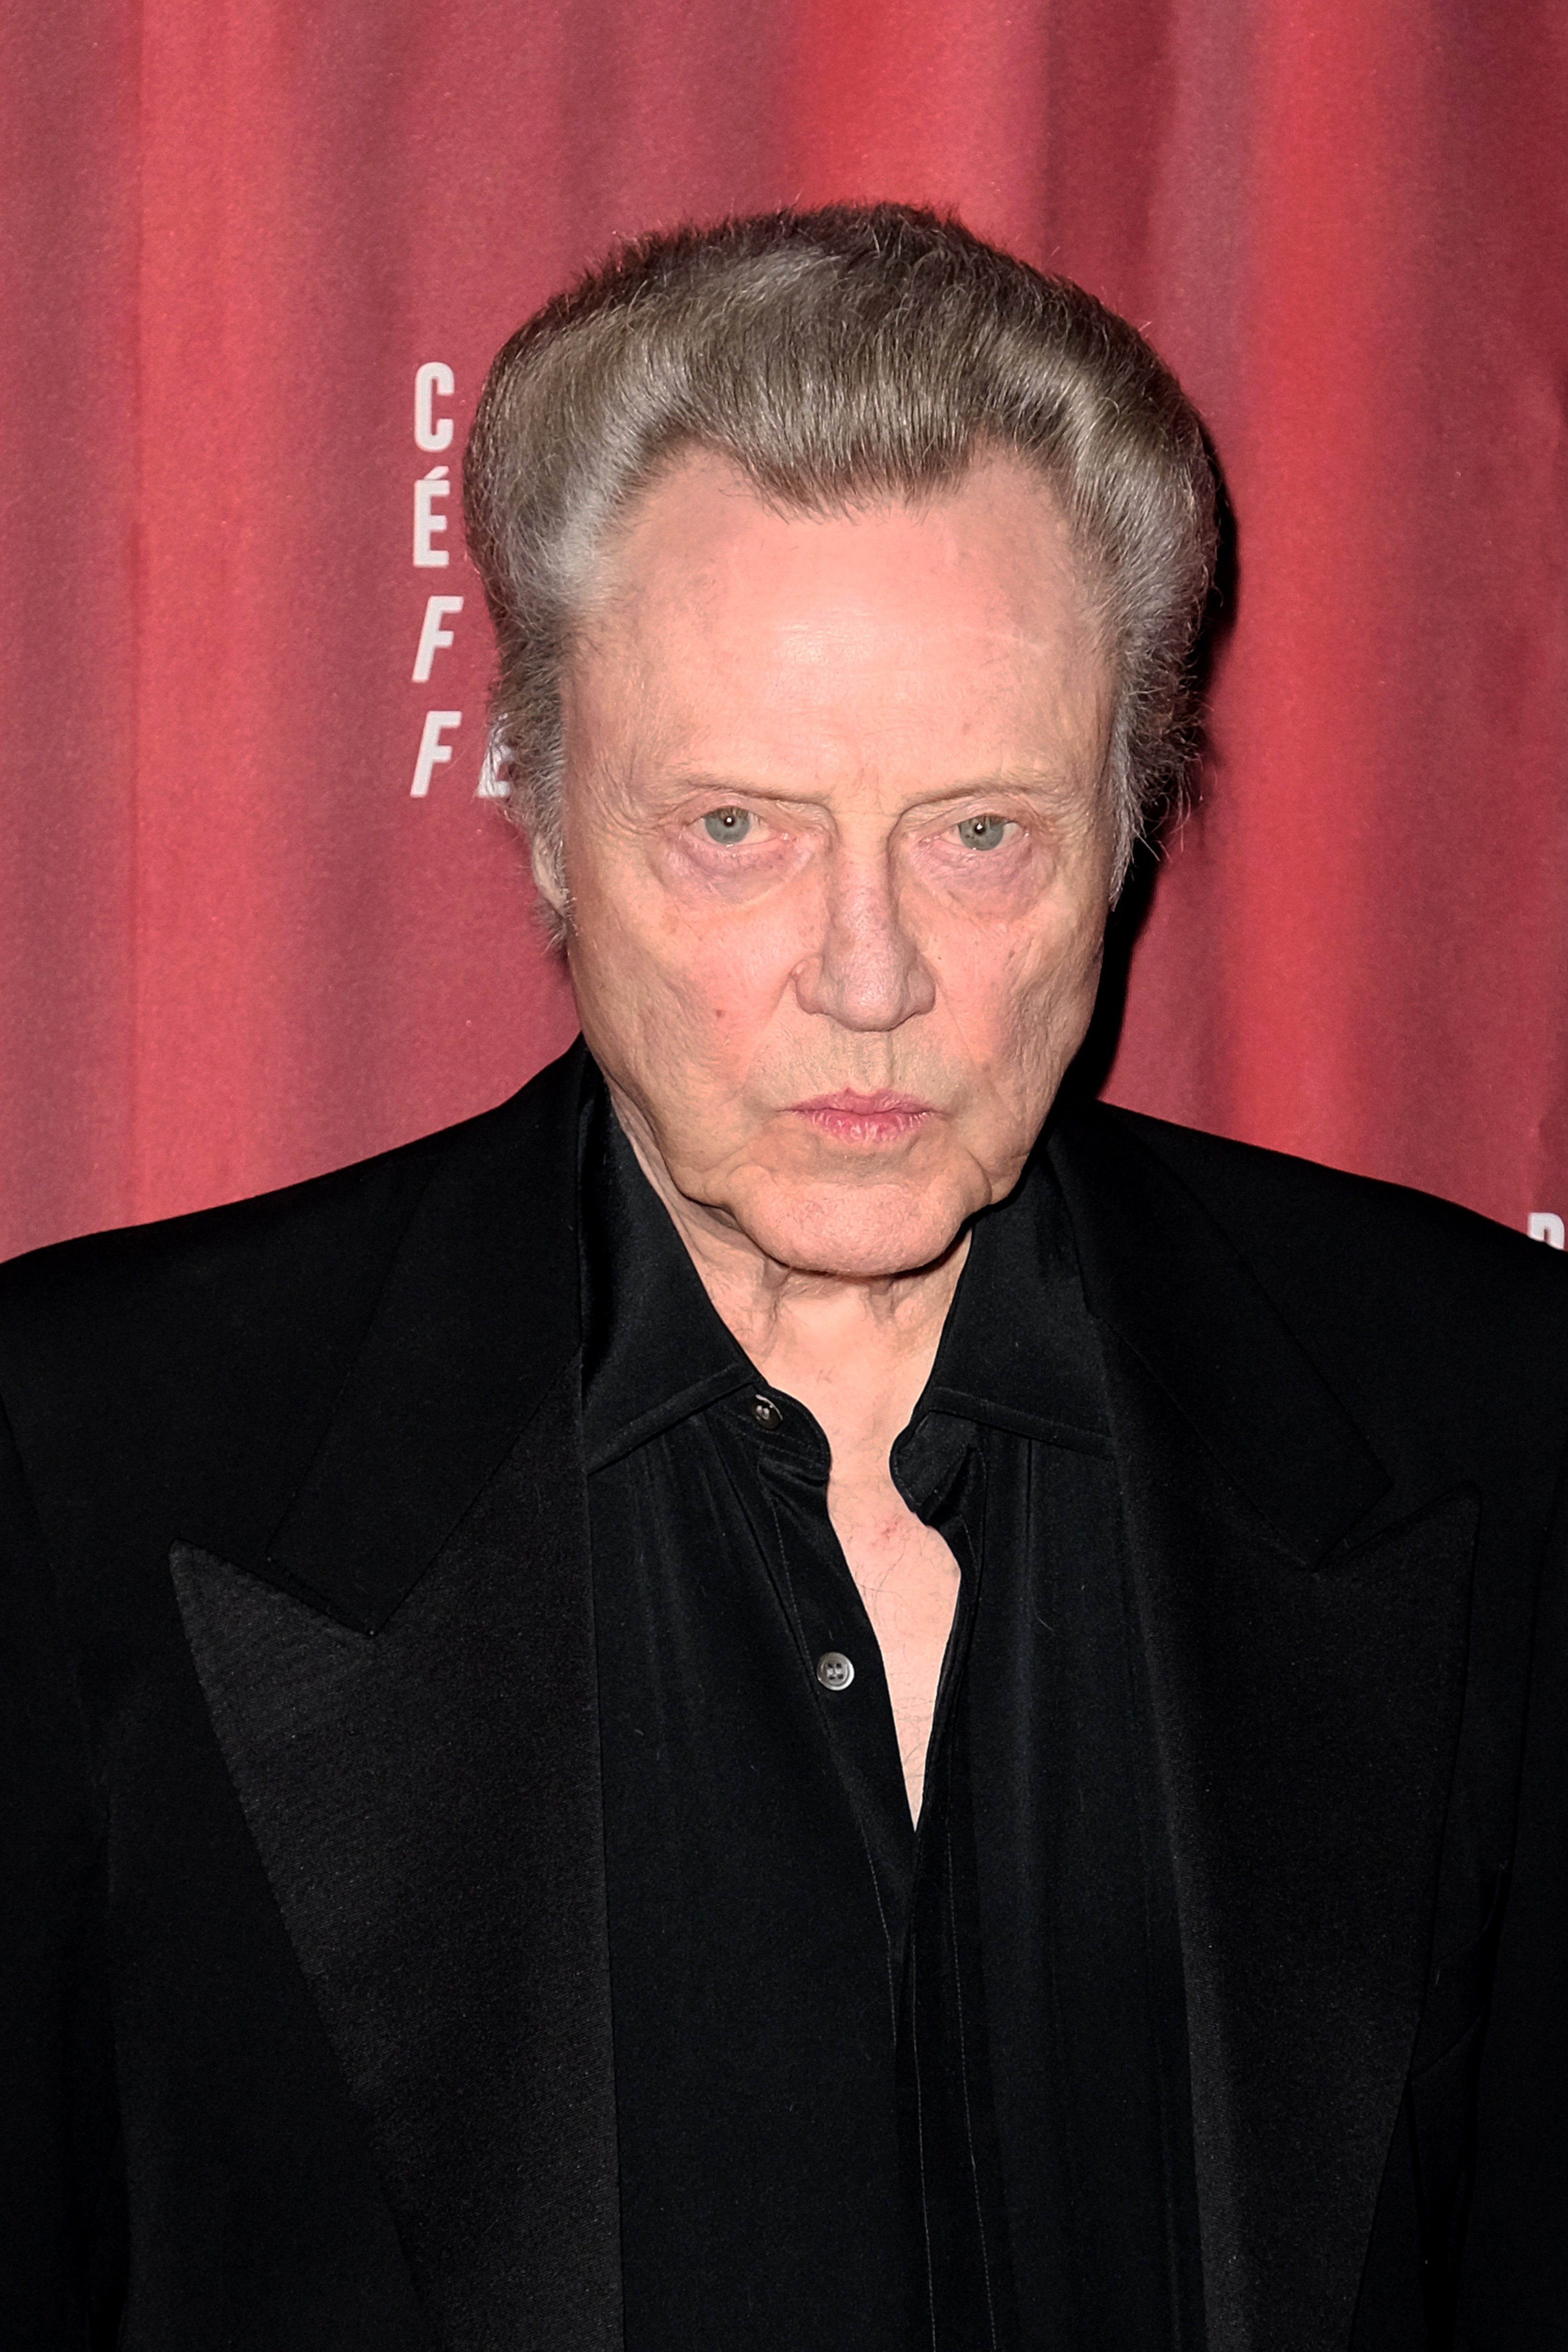  Actor Christopher Walken attends the 8th Champs Elysees Film Festival : Day Four Paris, France.  | Source: Getty Images